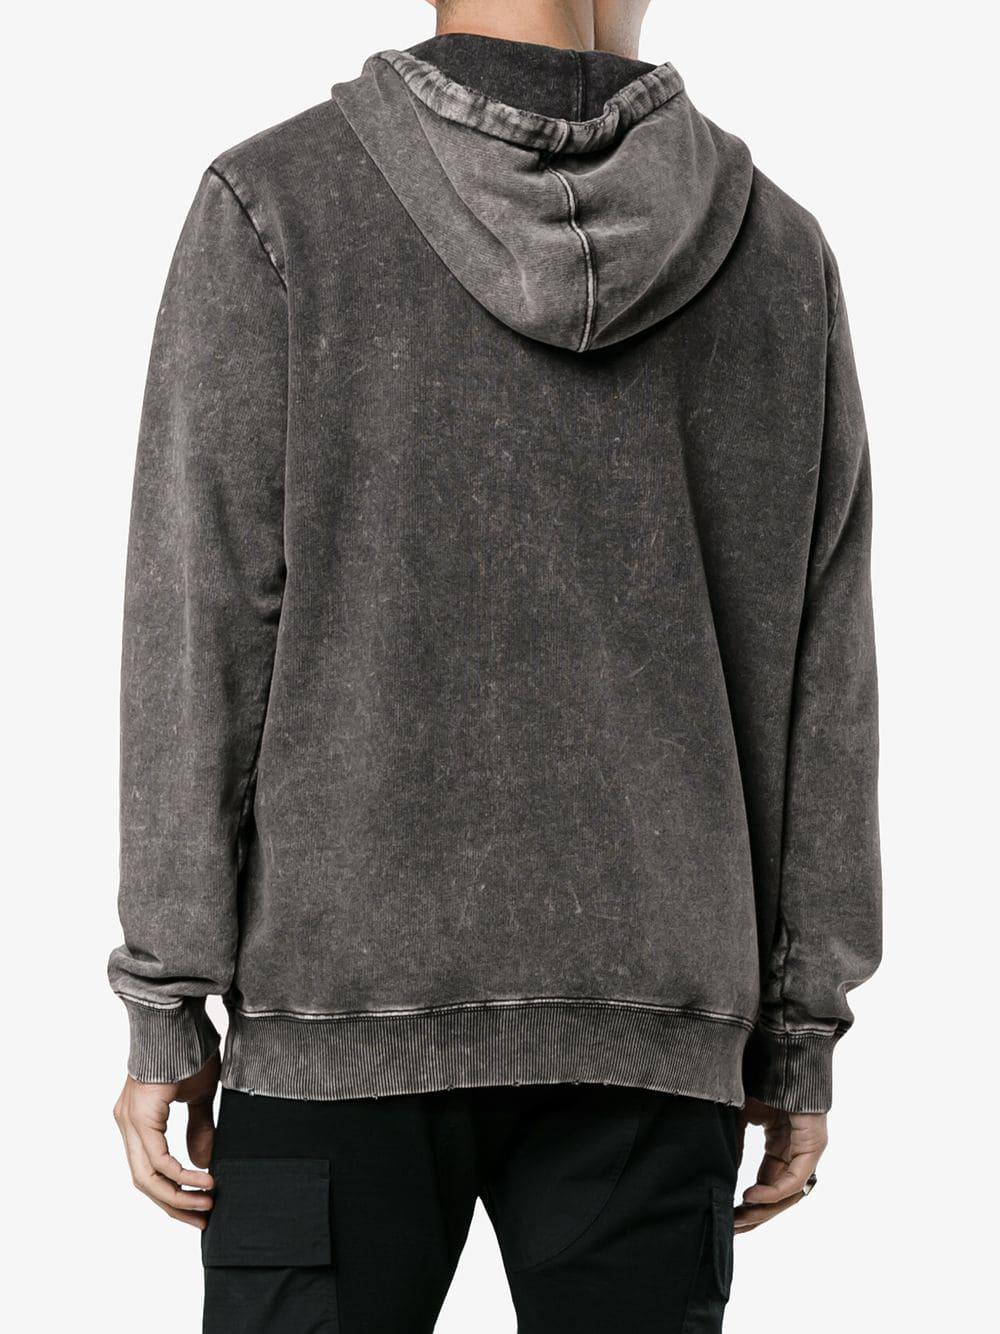 Saint Laurent Cotton Grey Stone Washed Hoodie By in Grey for Men - Lyst